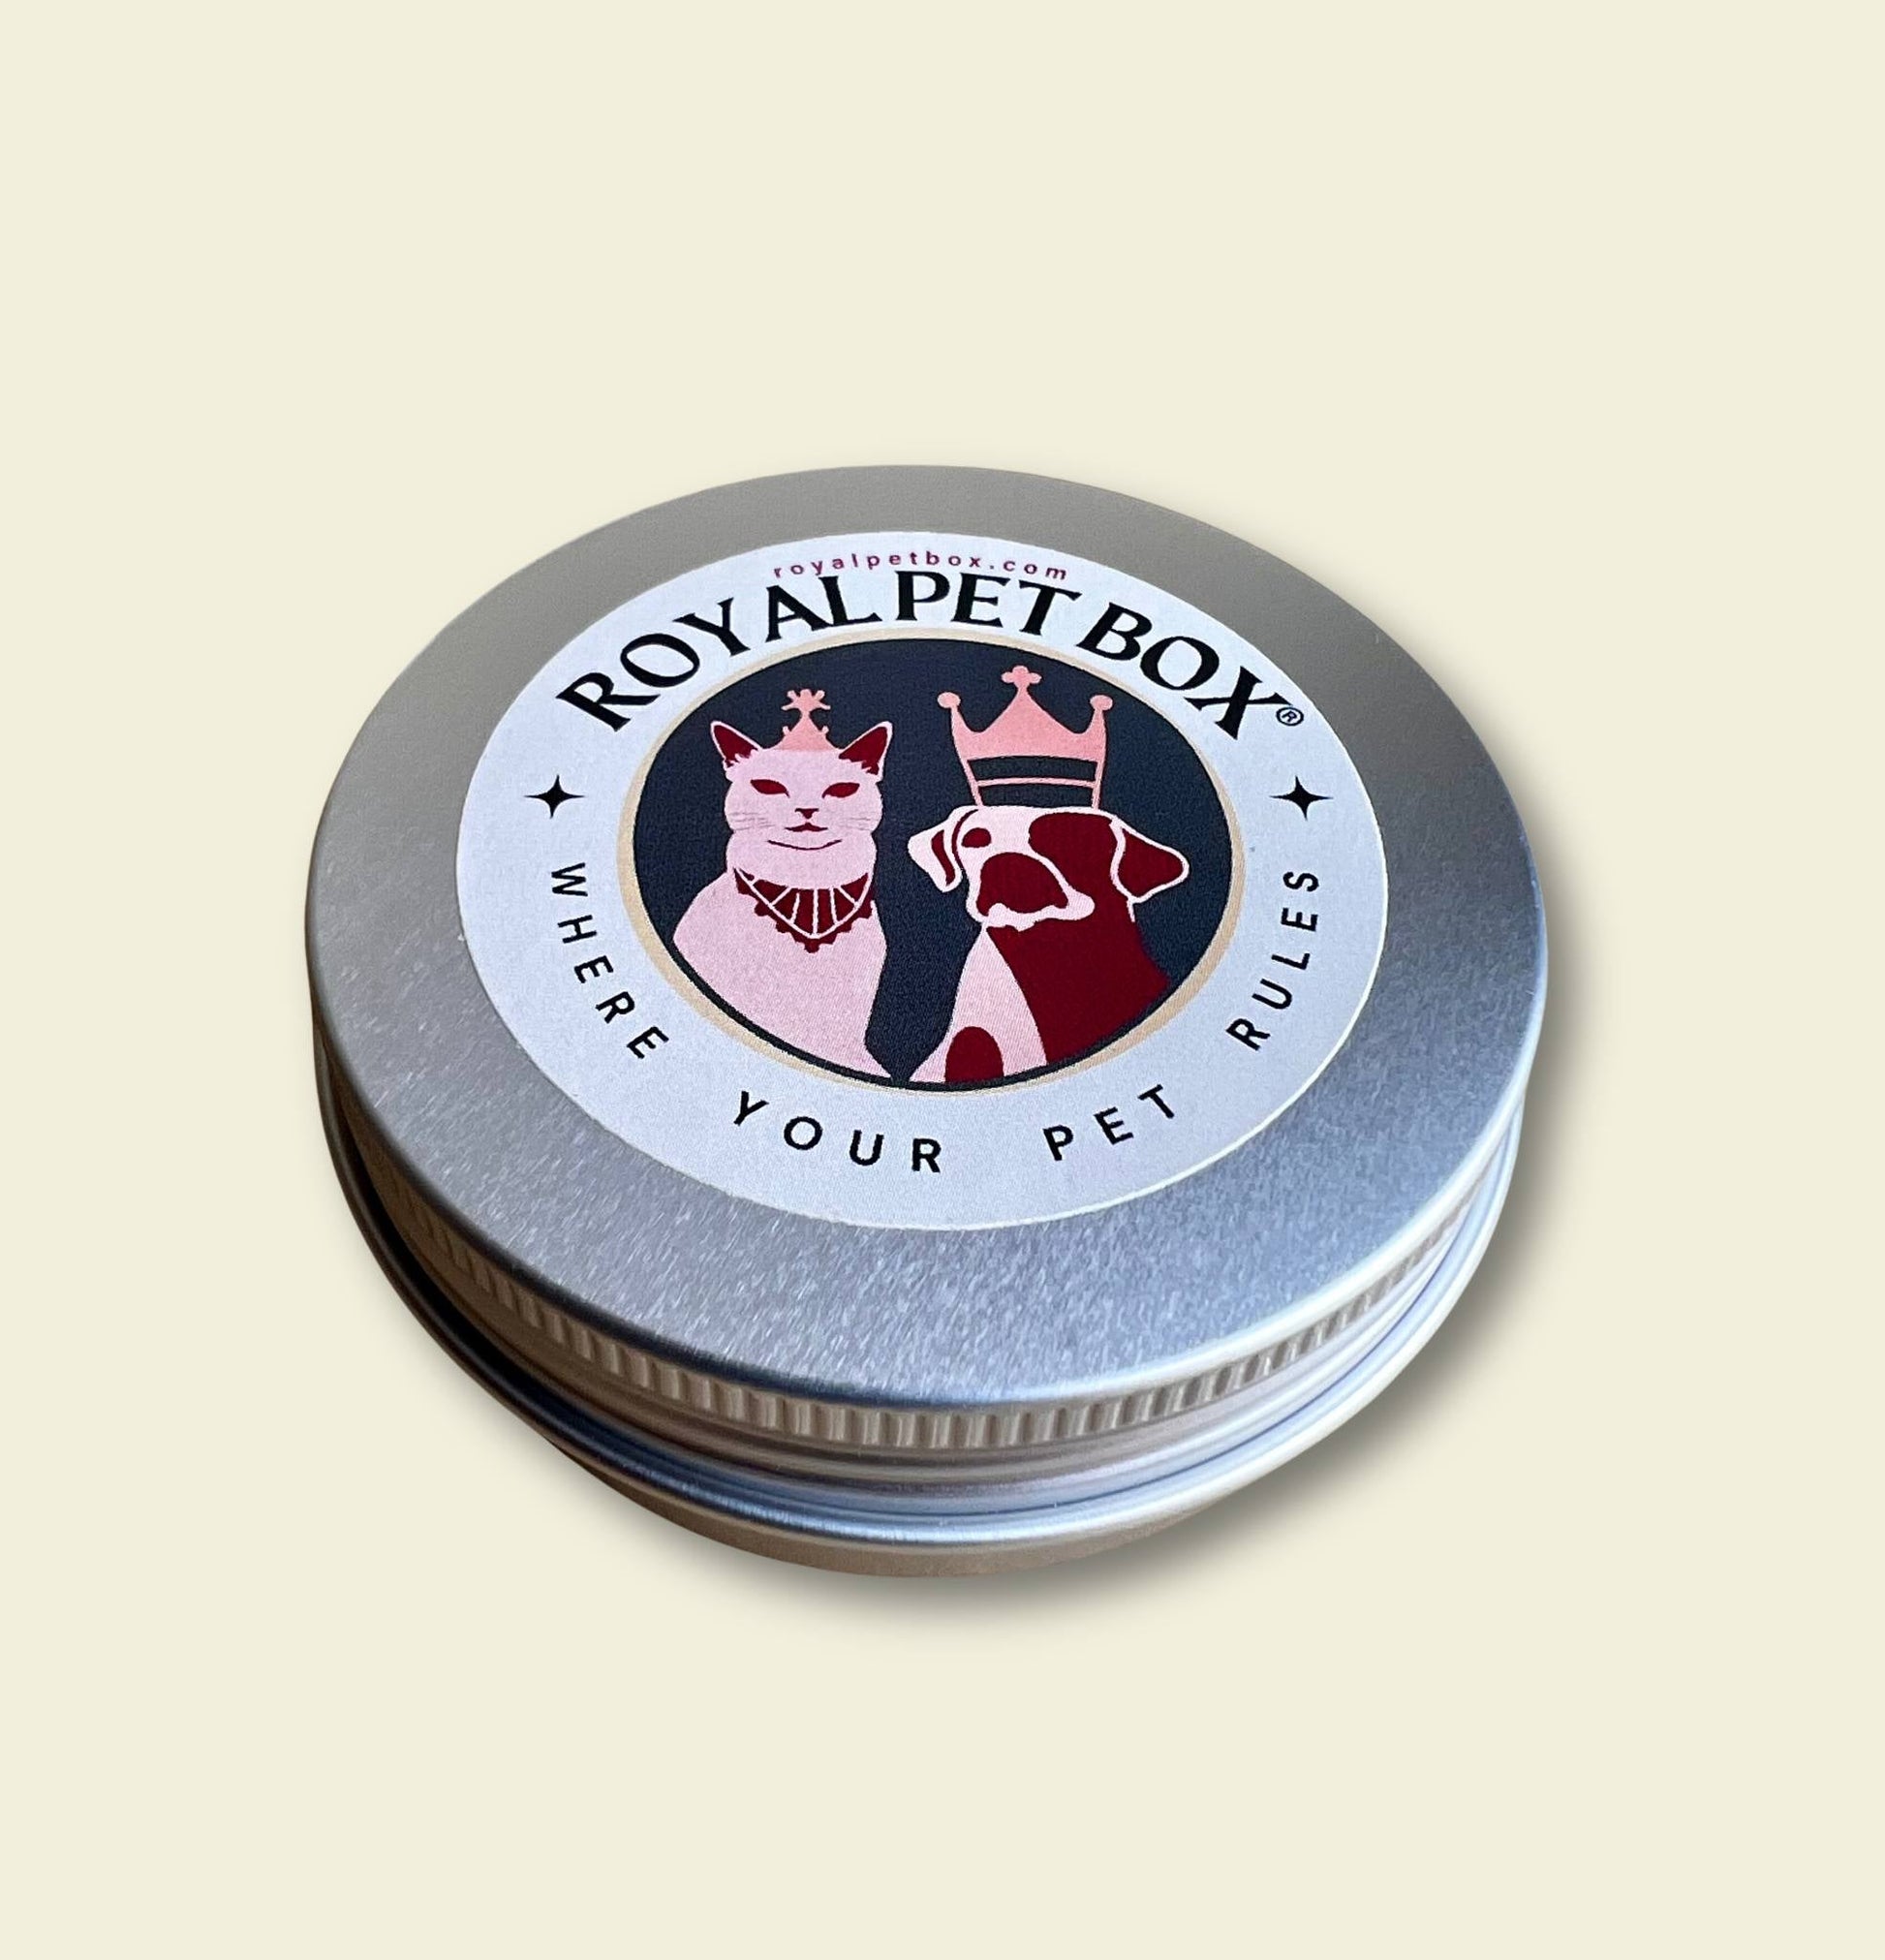 All Natural Paw Pad Balm for Cats and Dogs Closed Top